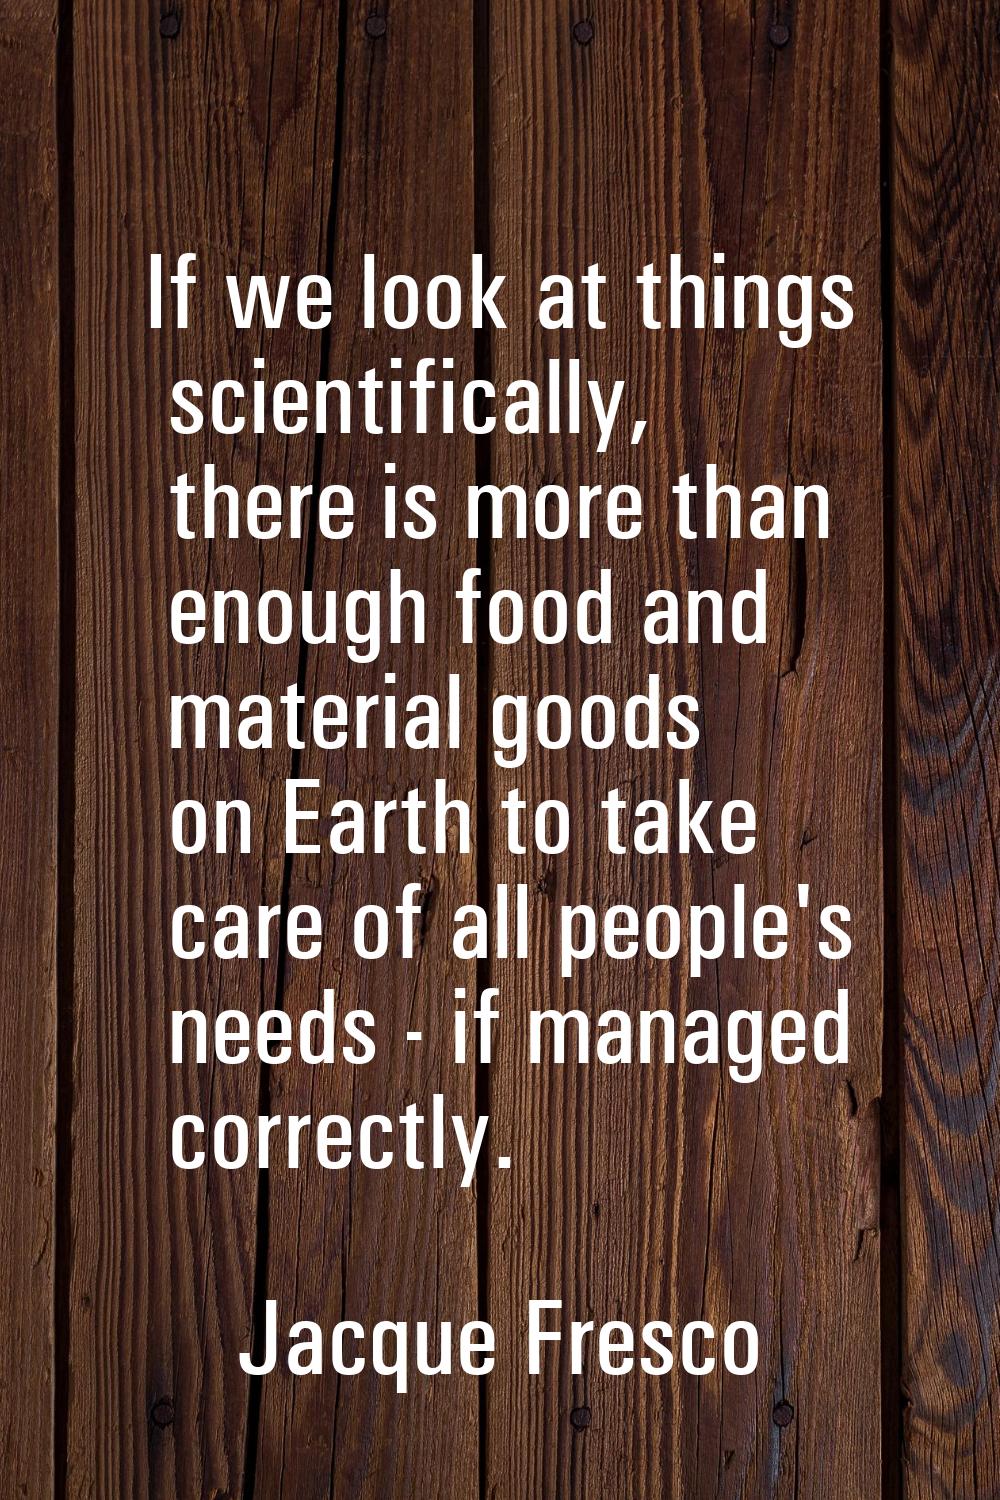 If we look at things scientifically, there is more than enough food and material goods on Earth to 